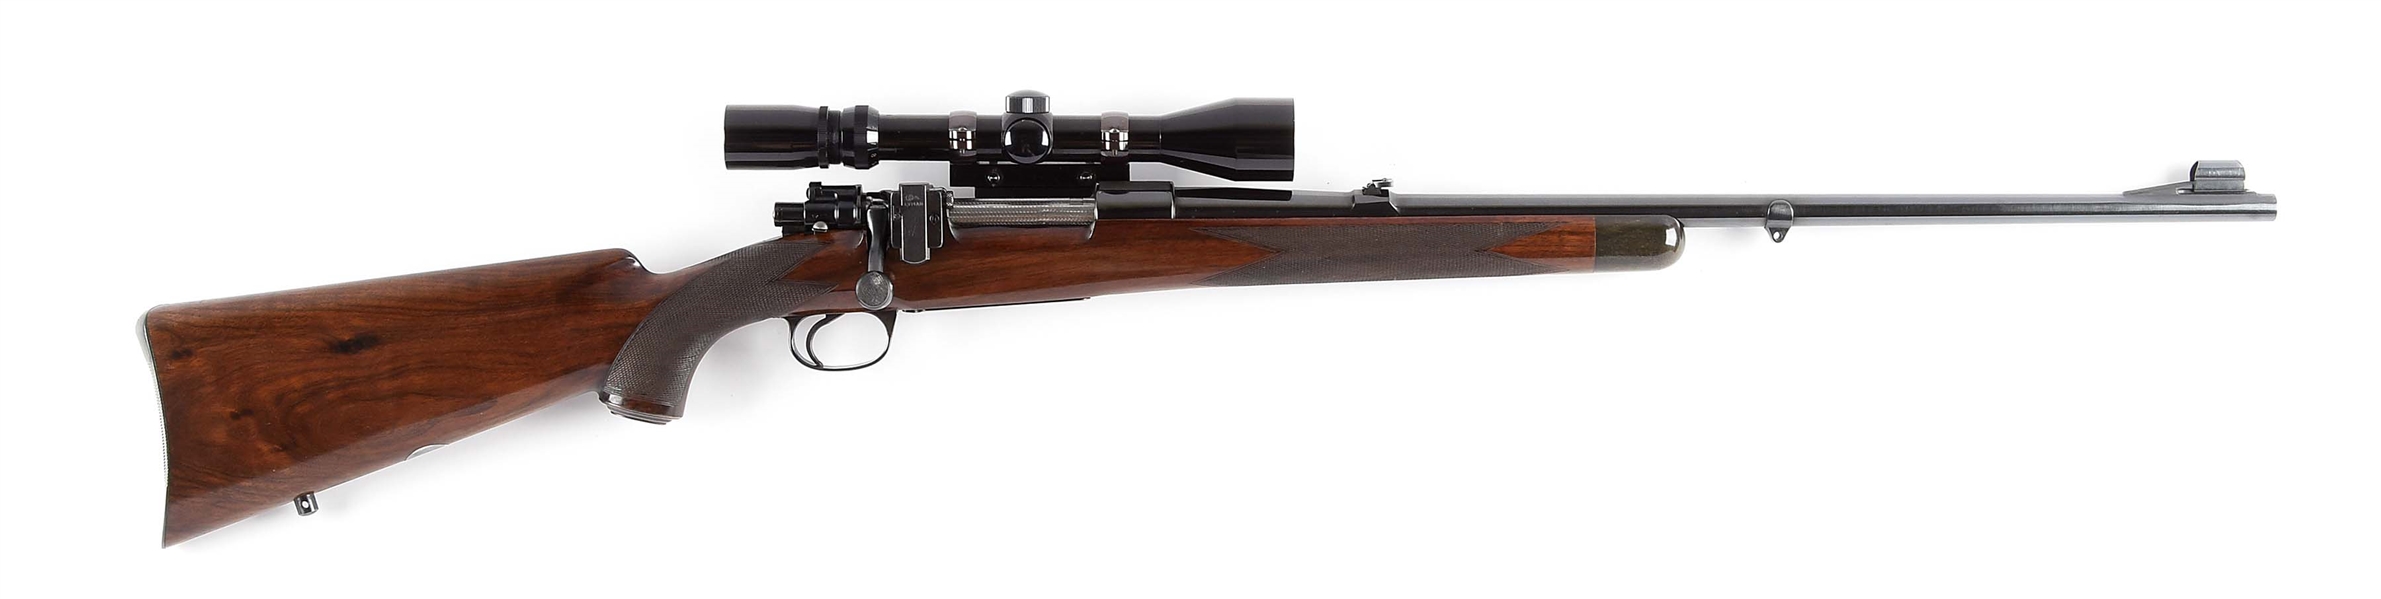 (C) EARLY POST WAR GRIFFIN & HOWE CUSTOM 98 MAUSER BOLT ACTION SPORTING RIFLE WITH SCOPE (CIRCA 1946).